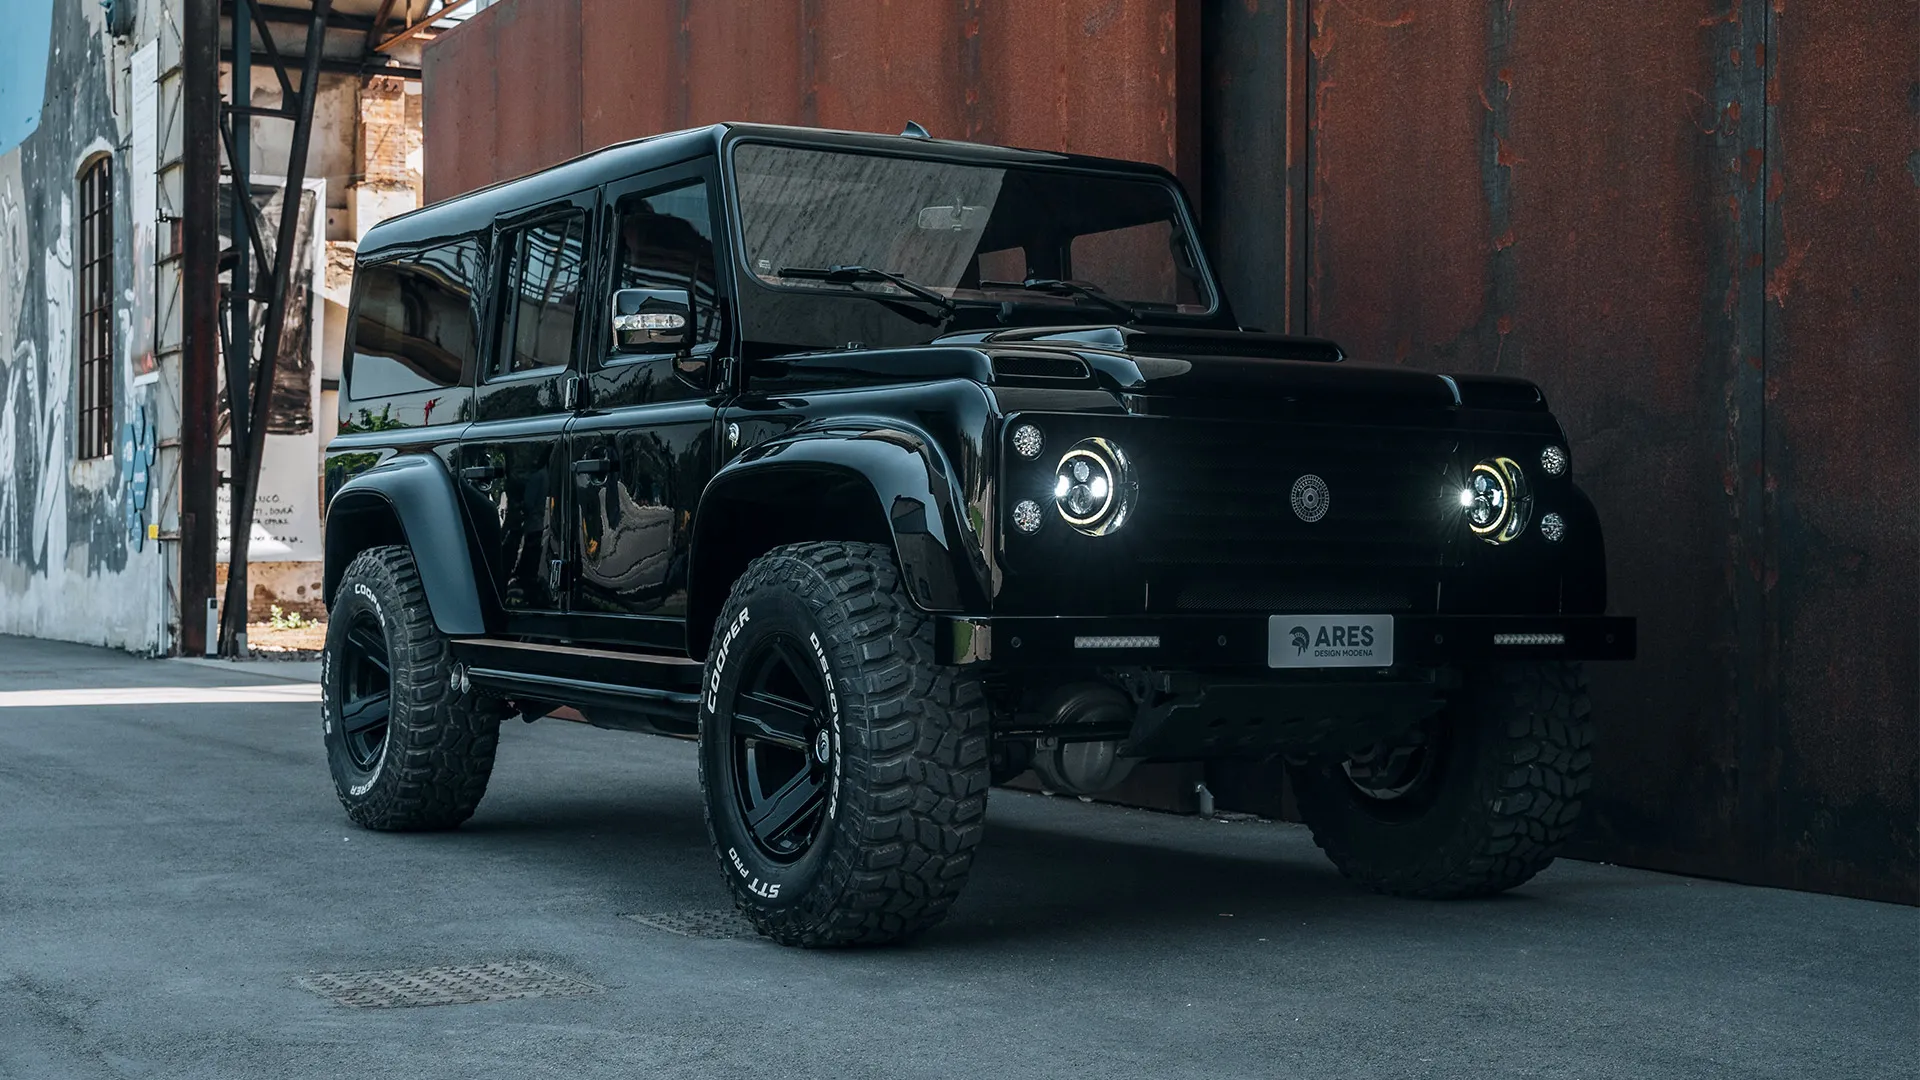 Ares Modena Defender is a £200,000 Anglo-Italian restomod